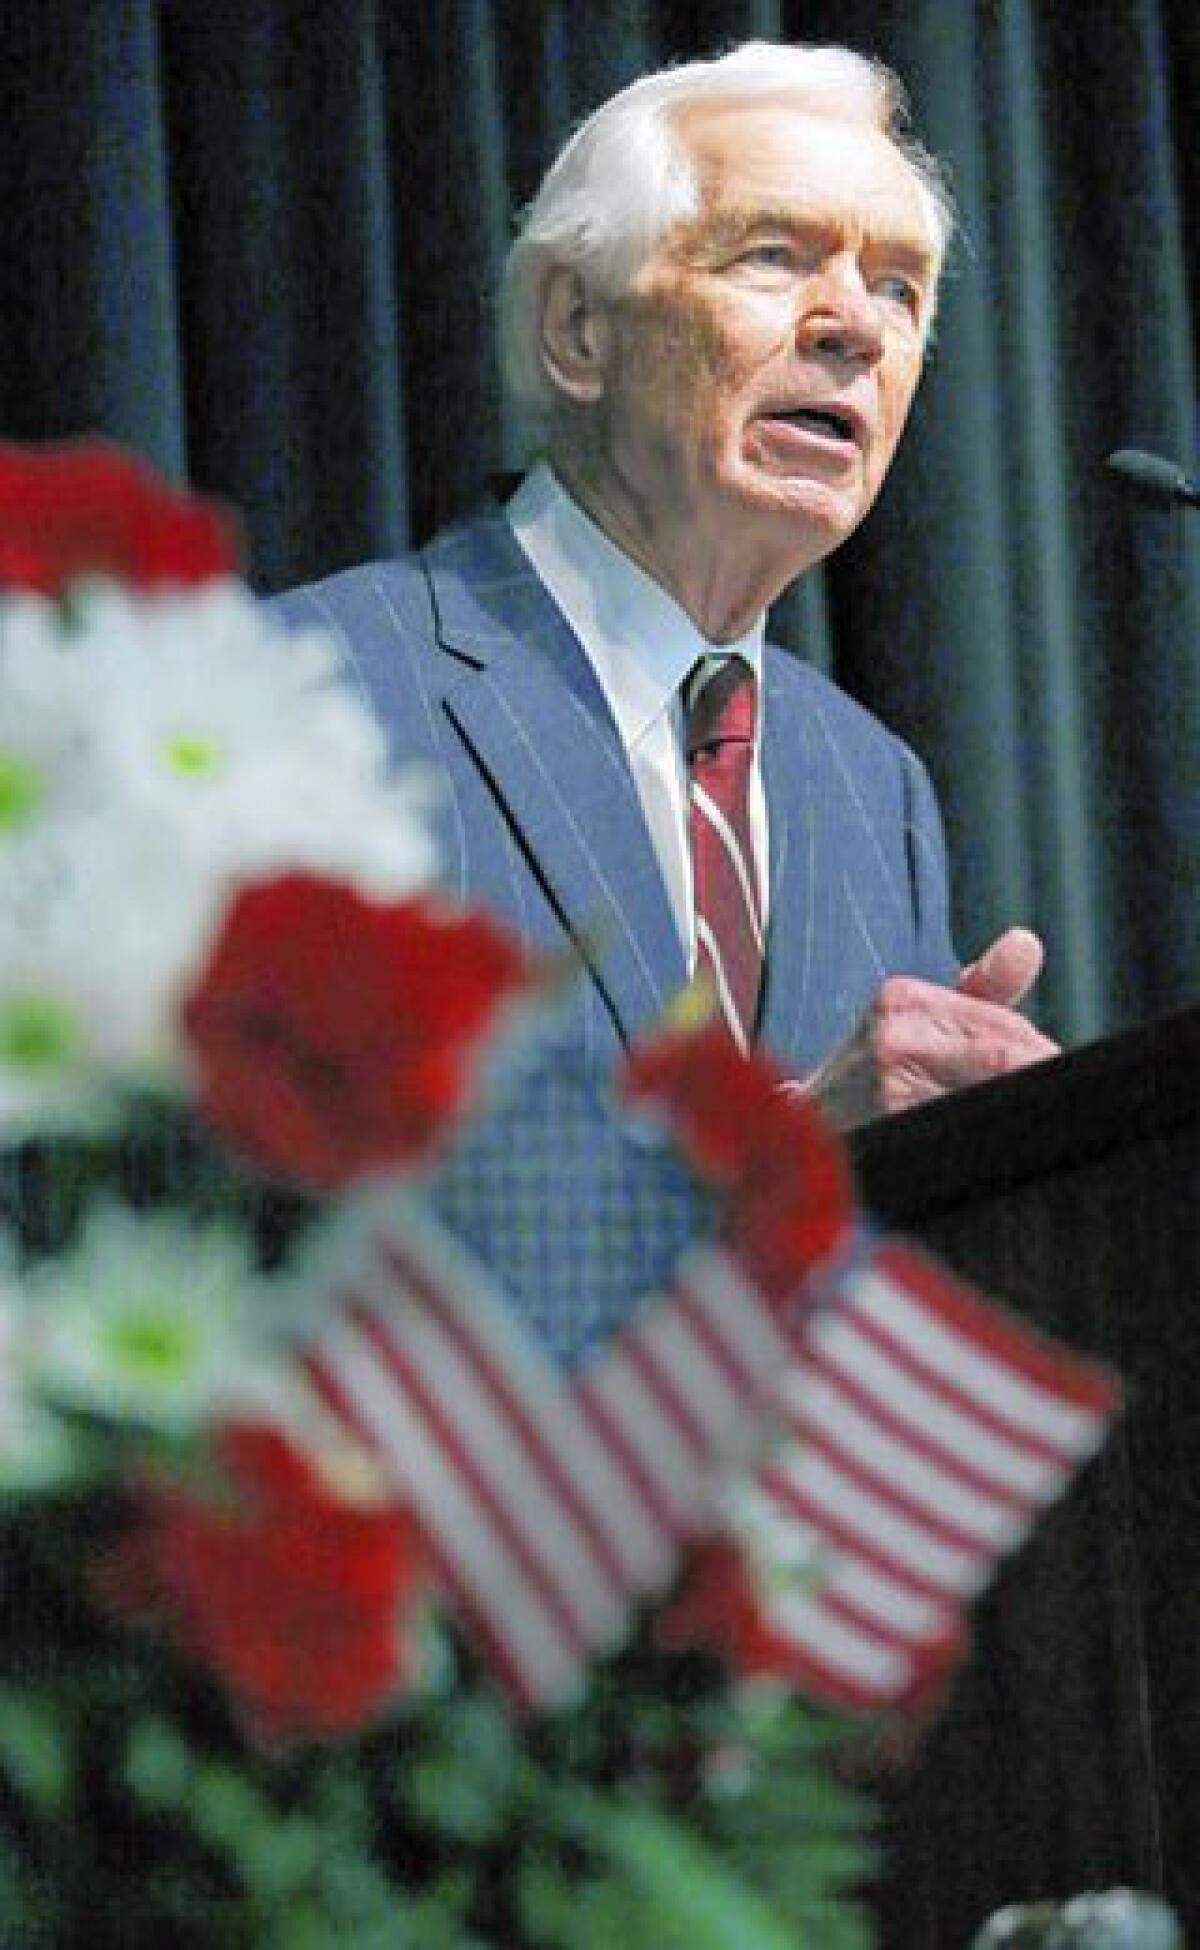 Sen. Thad Cochran (R-Miss.), facing a tough primary challenge from the tea party, recently told the Pearl, Miss., Chamber of Commerce that government “has played an important role in creating the environment that sustains economic growth and job creation.”